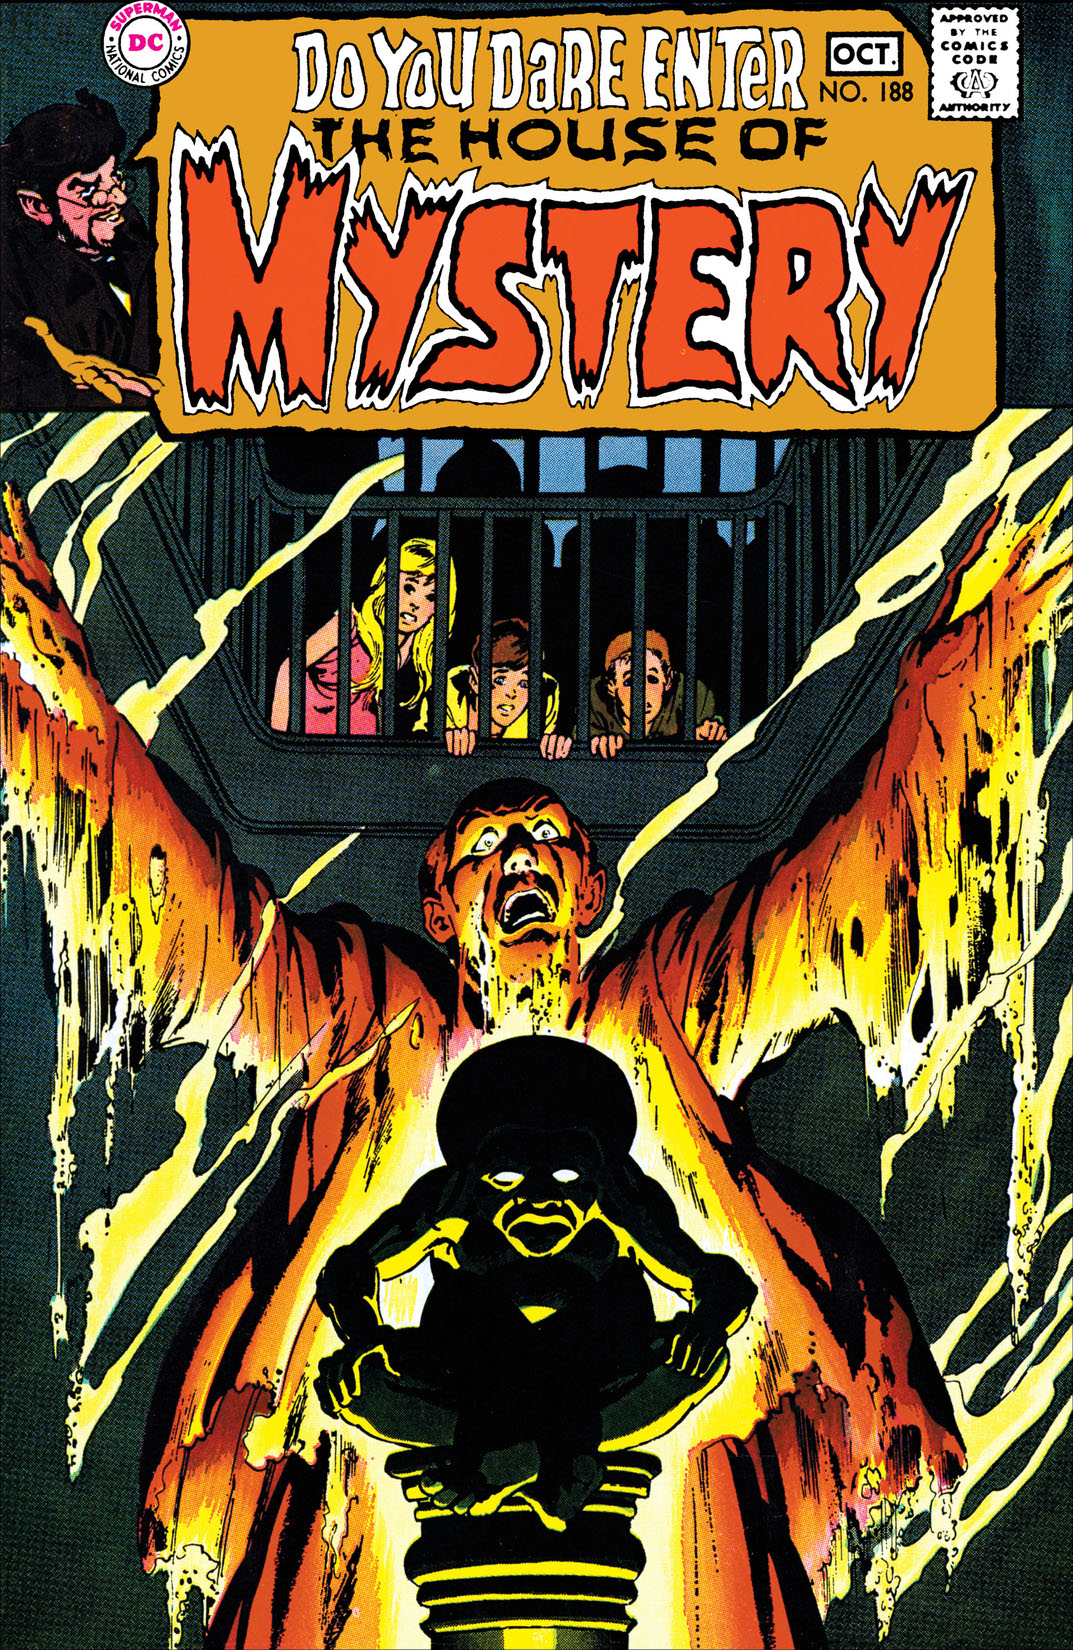 House of Mystery (1951-) #188 preview images